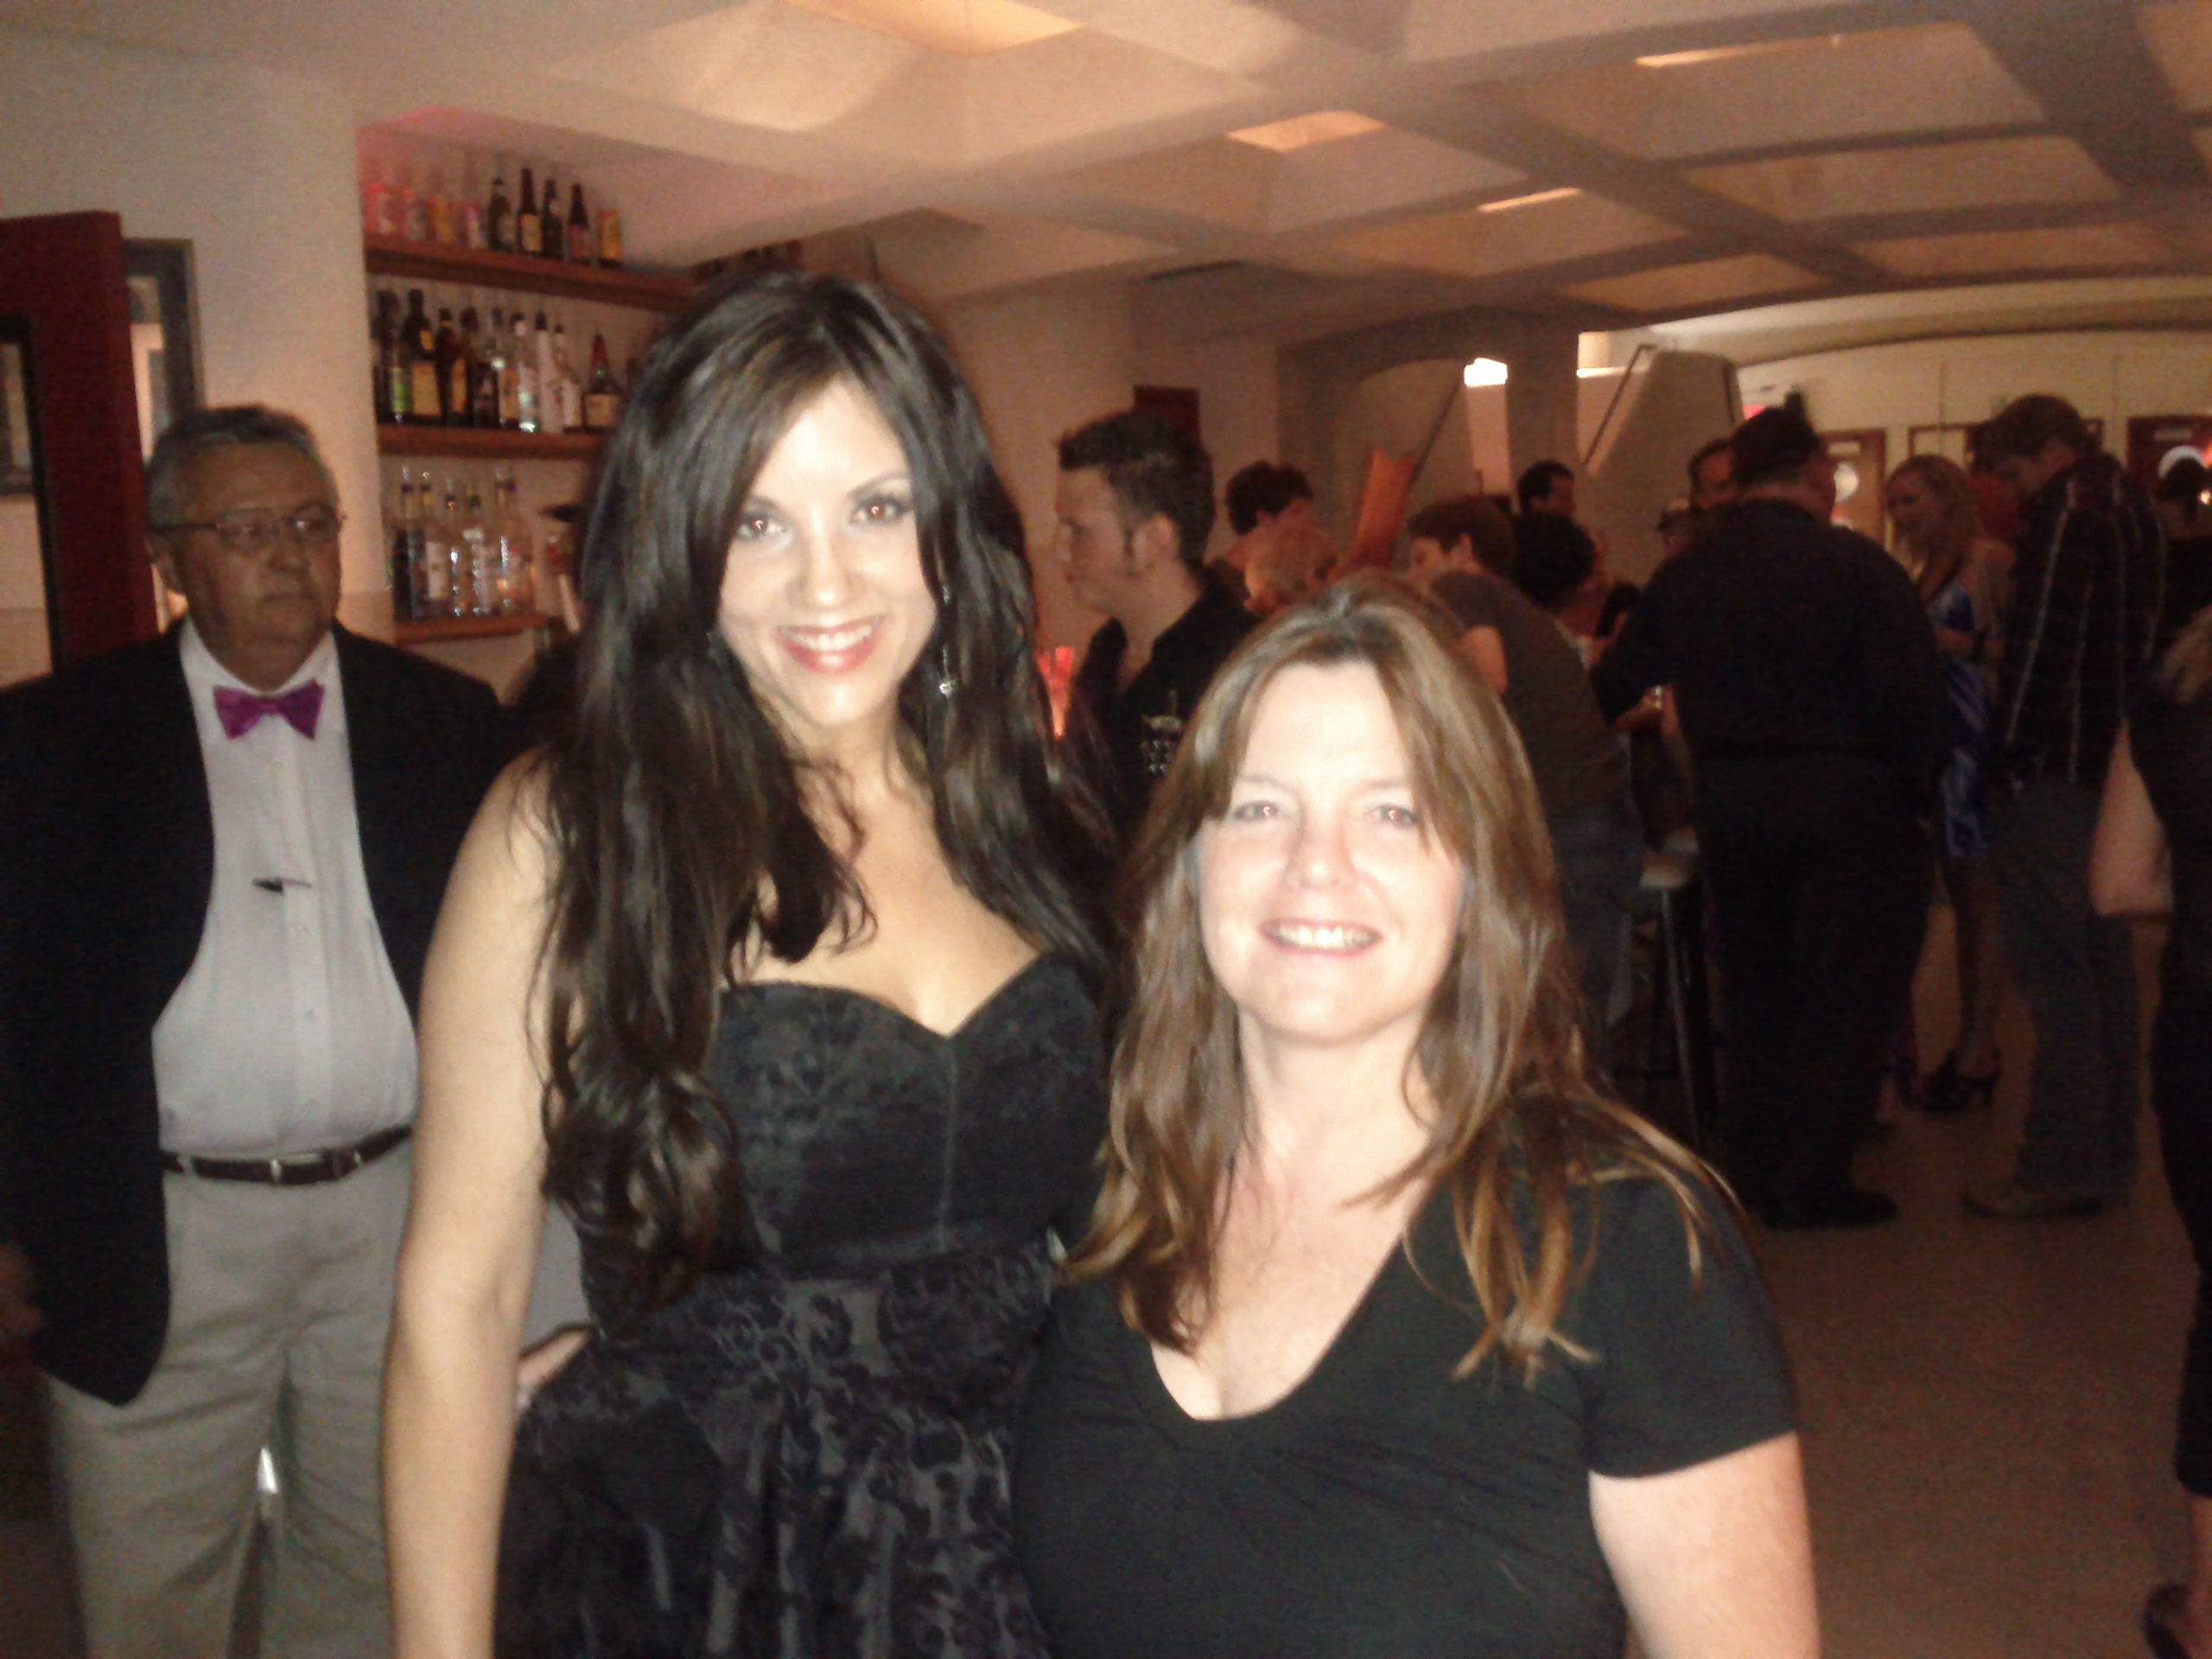 Stephanie Urbana-Jones and Libby Mitchell at Courage Premiere in Dallas, TX August 2011